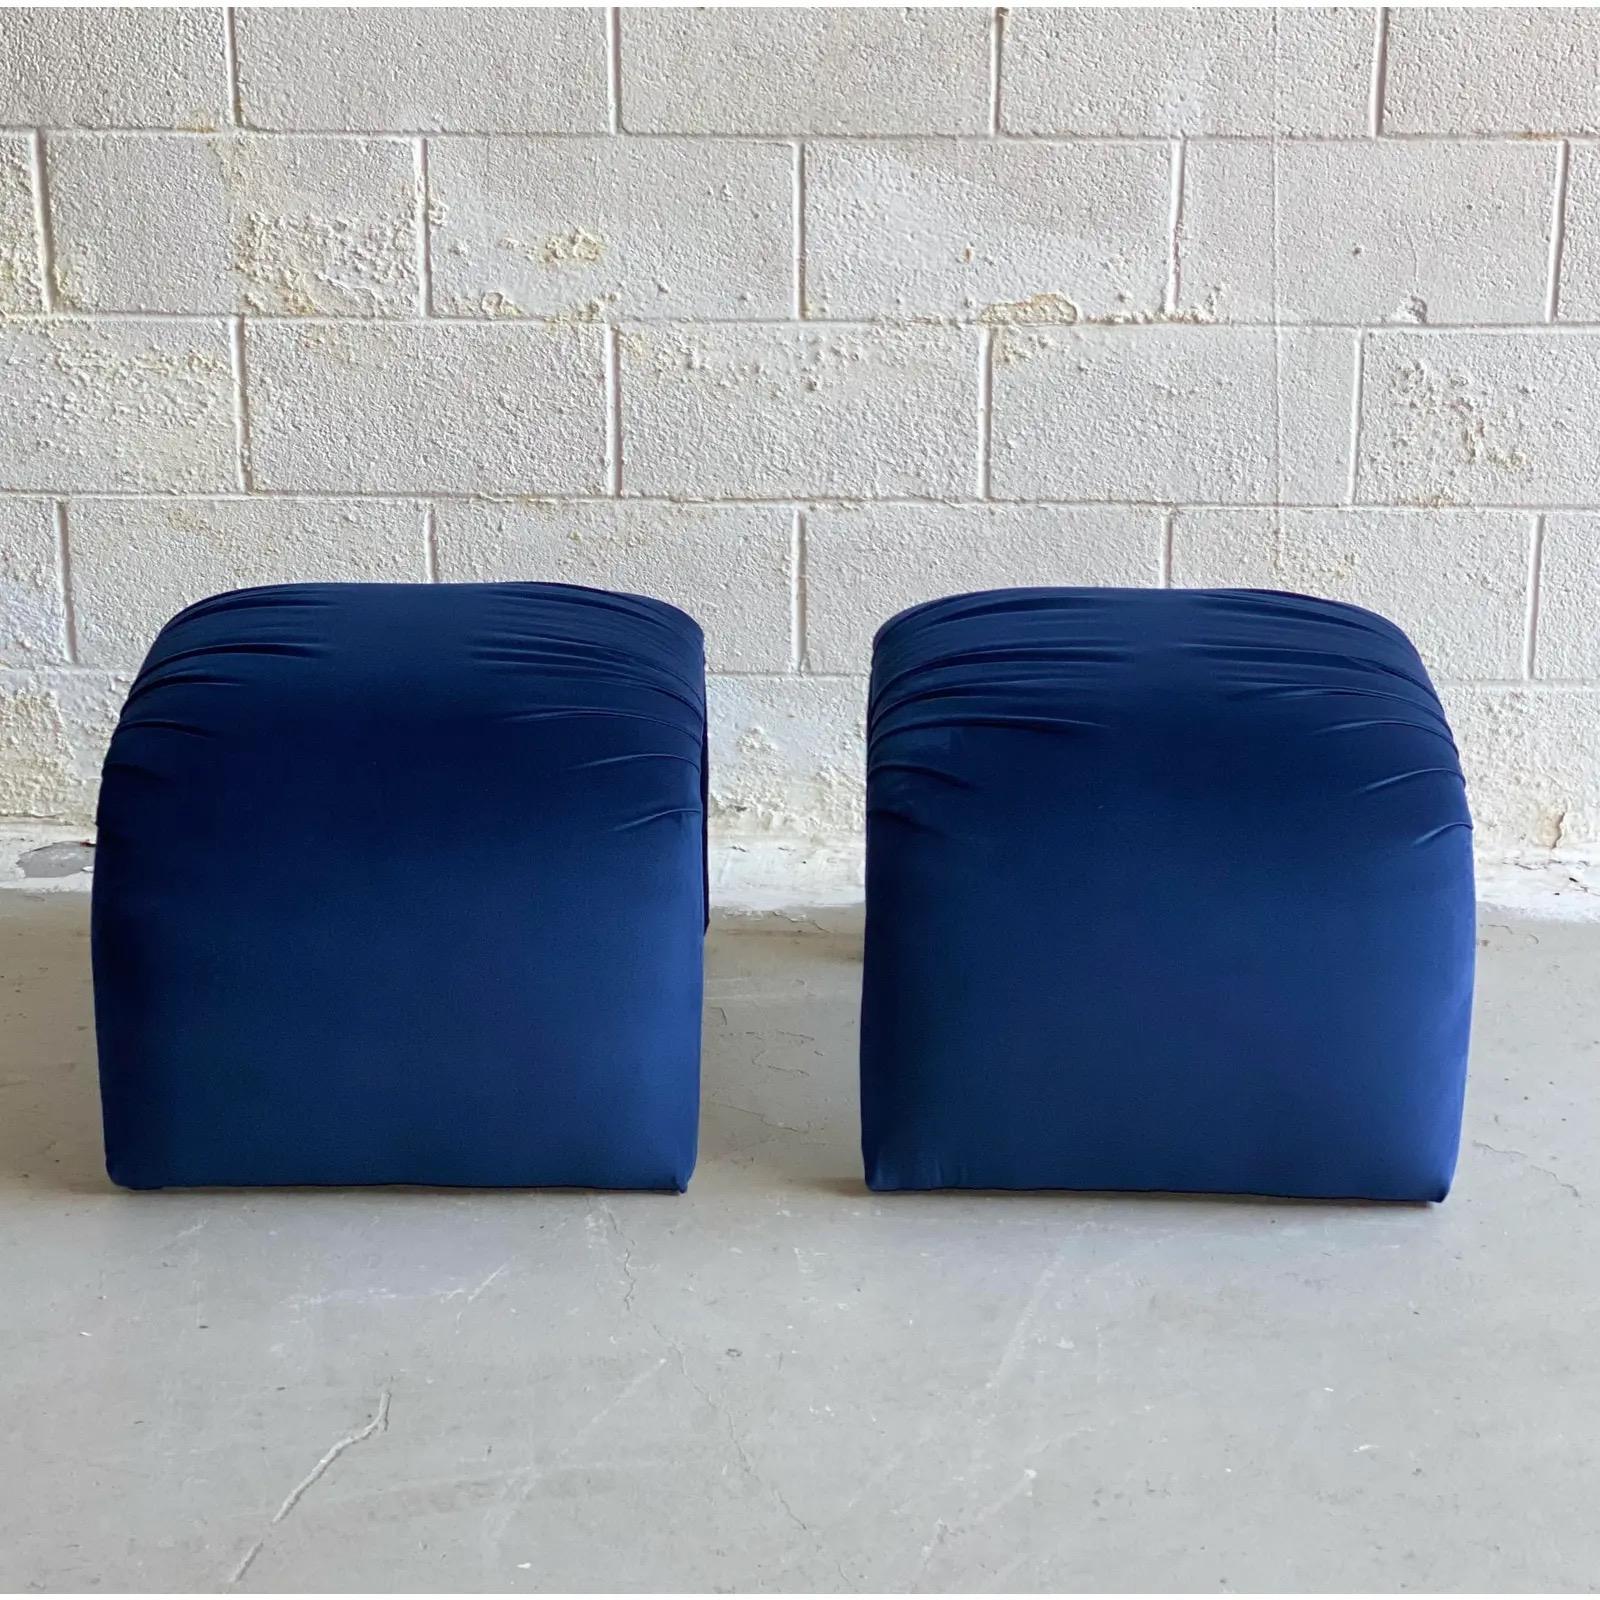 North American 1980s Vintage Waterfall Blue Upholstered Ottomans, a Pair For Sale